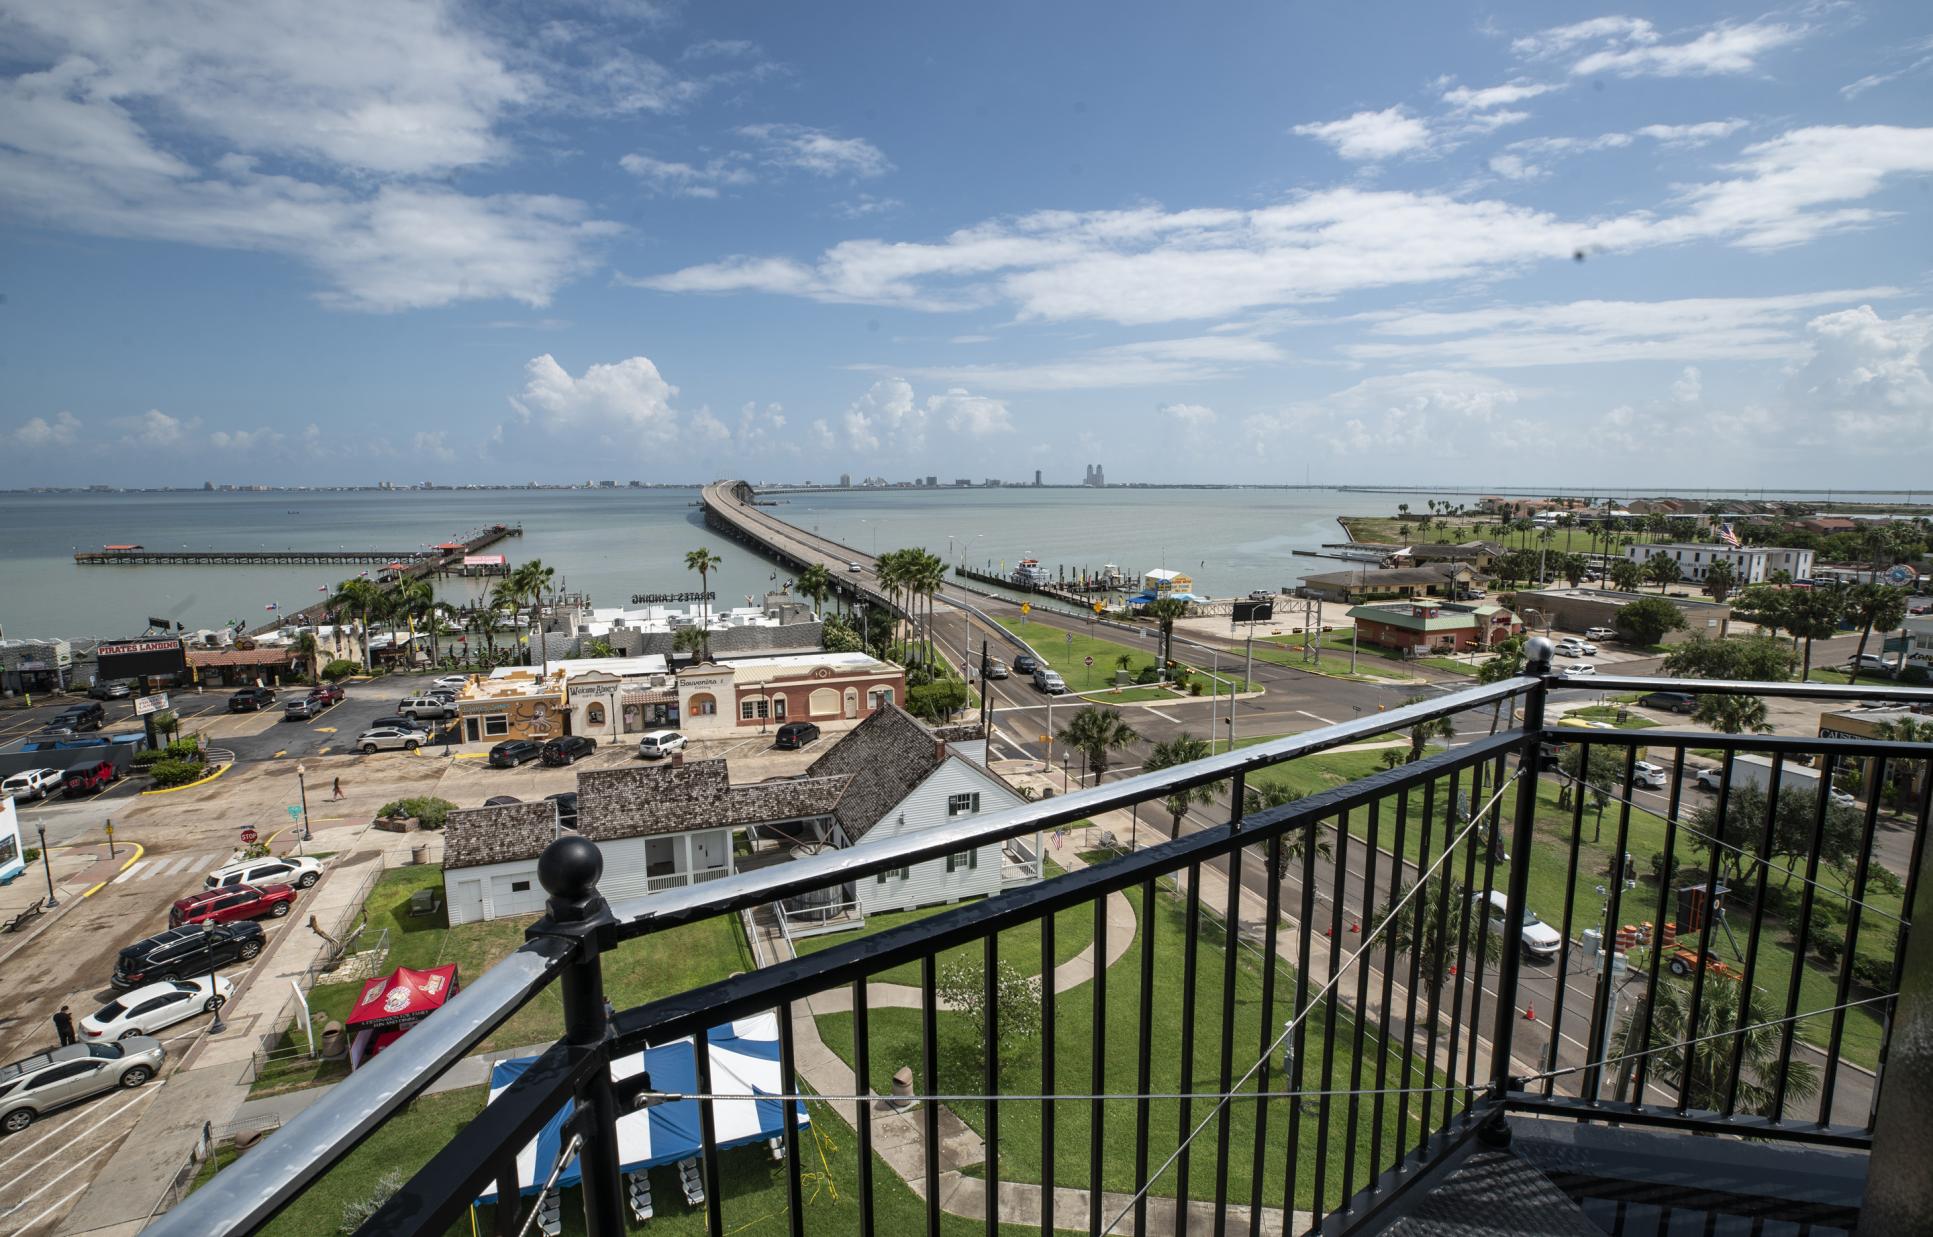 View from the balcony of the Port Isabel Lighthouse